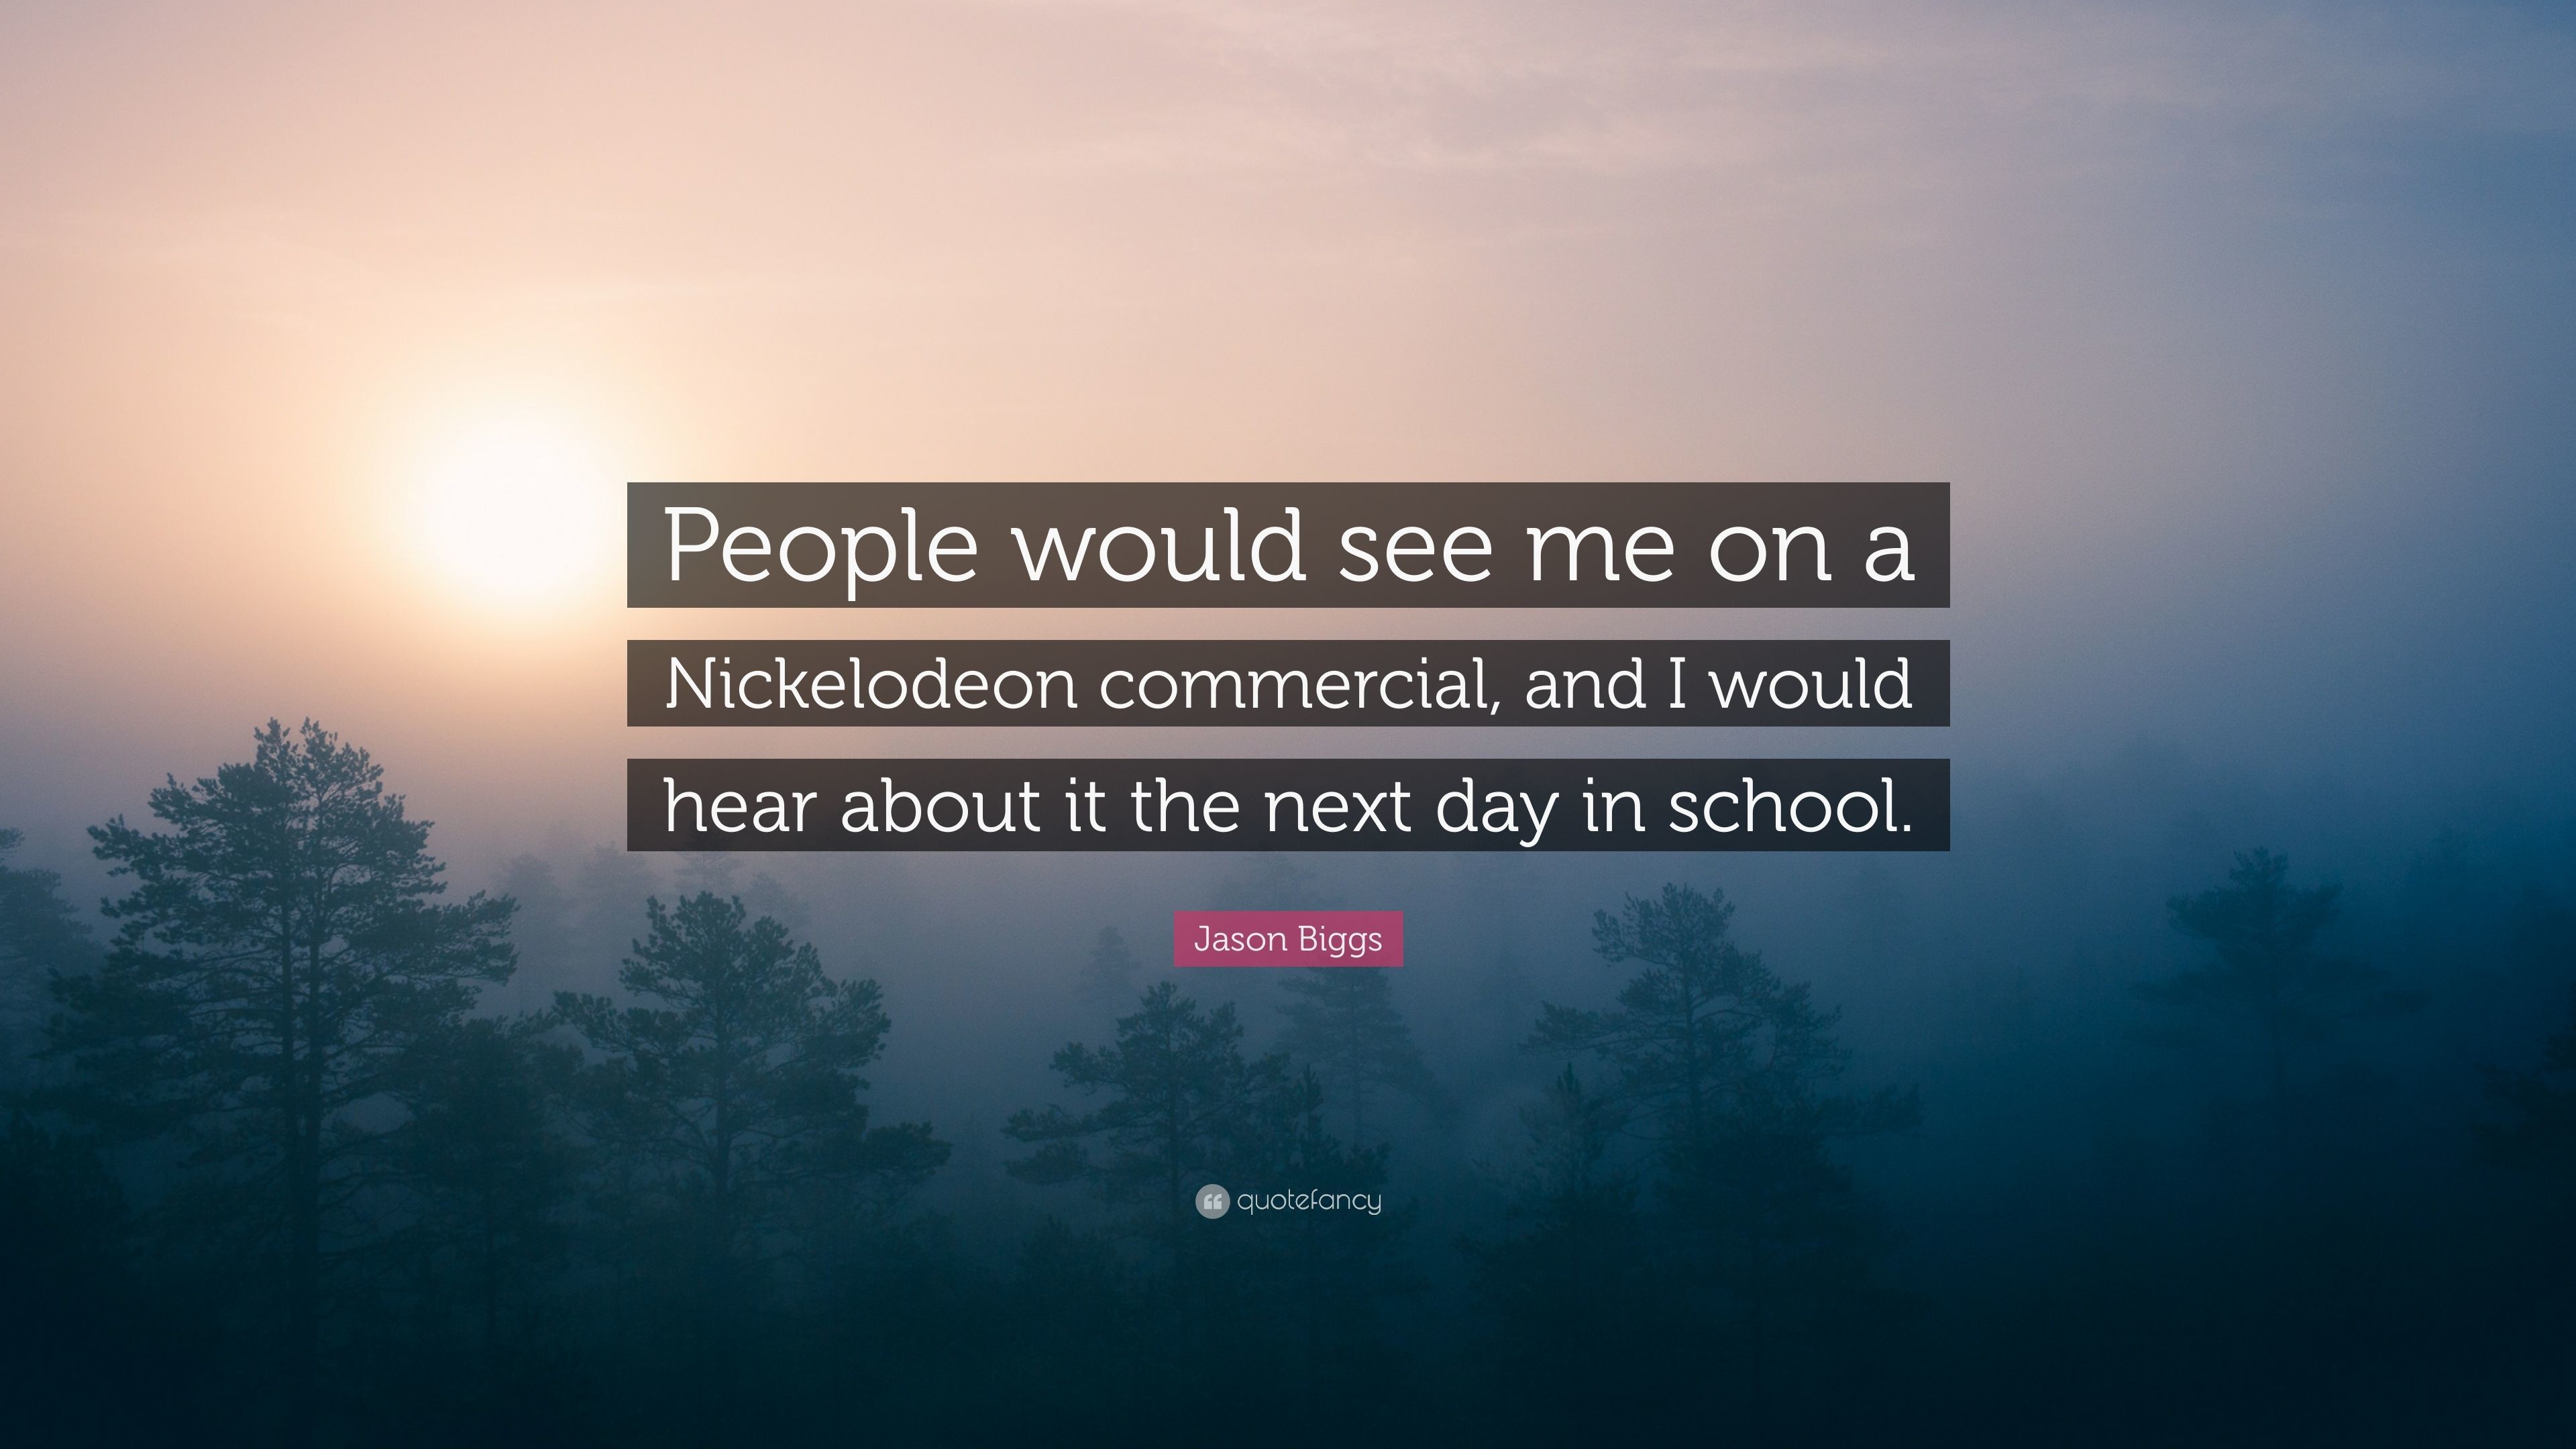 3840x2160 Jason Biggs Quote: “People would see me on a Nickelodeon commercial, and I